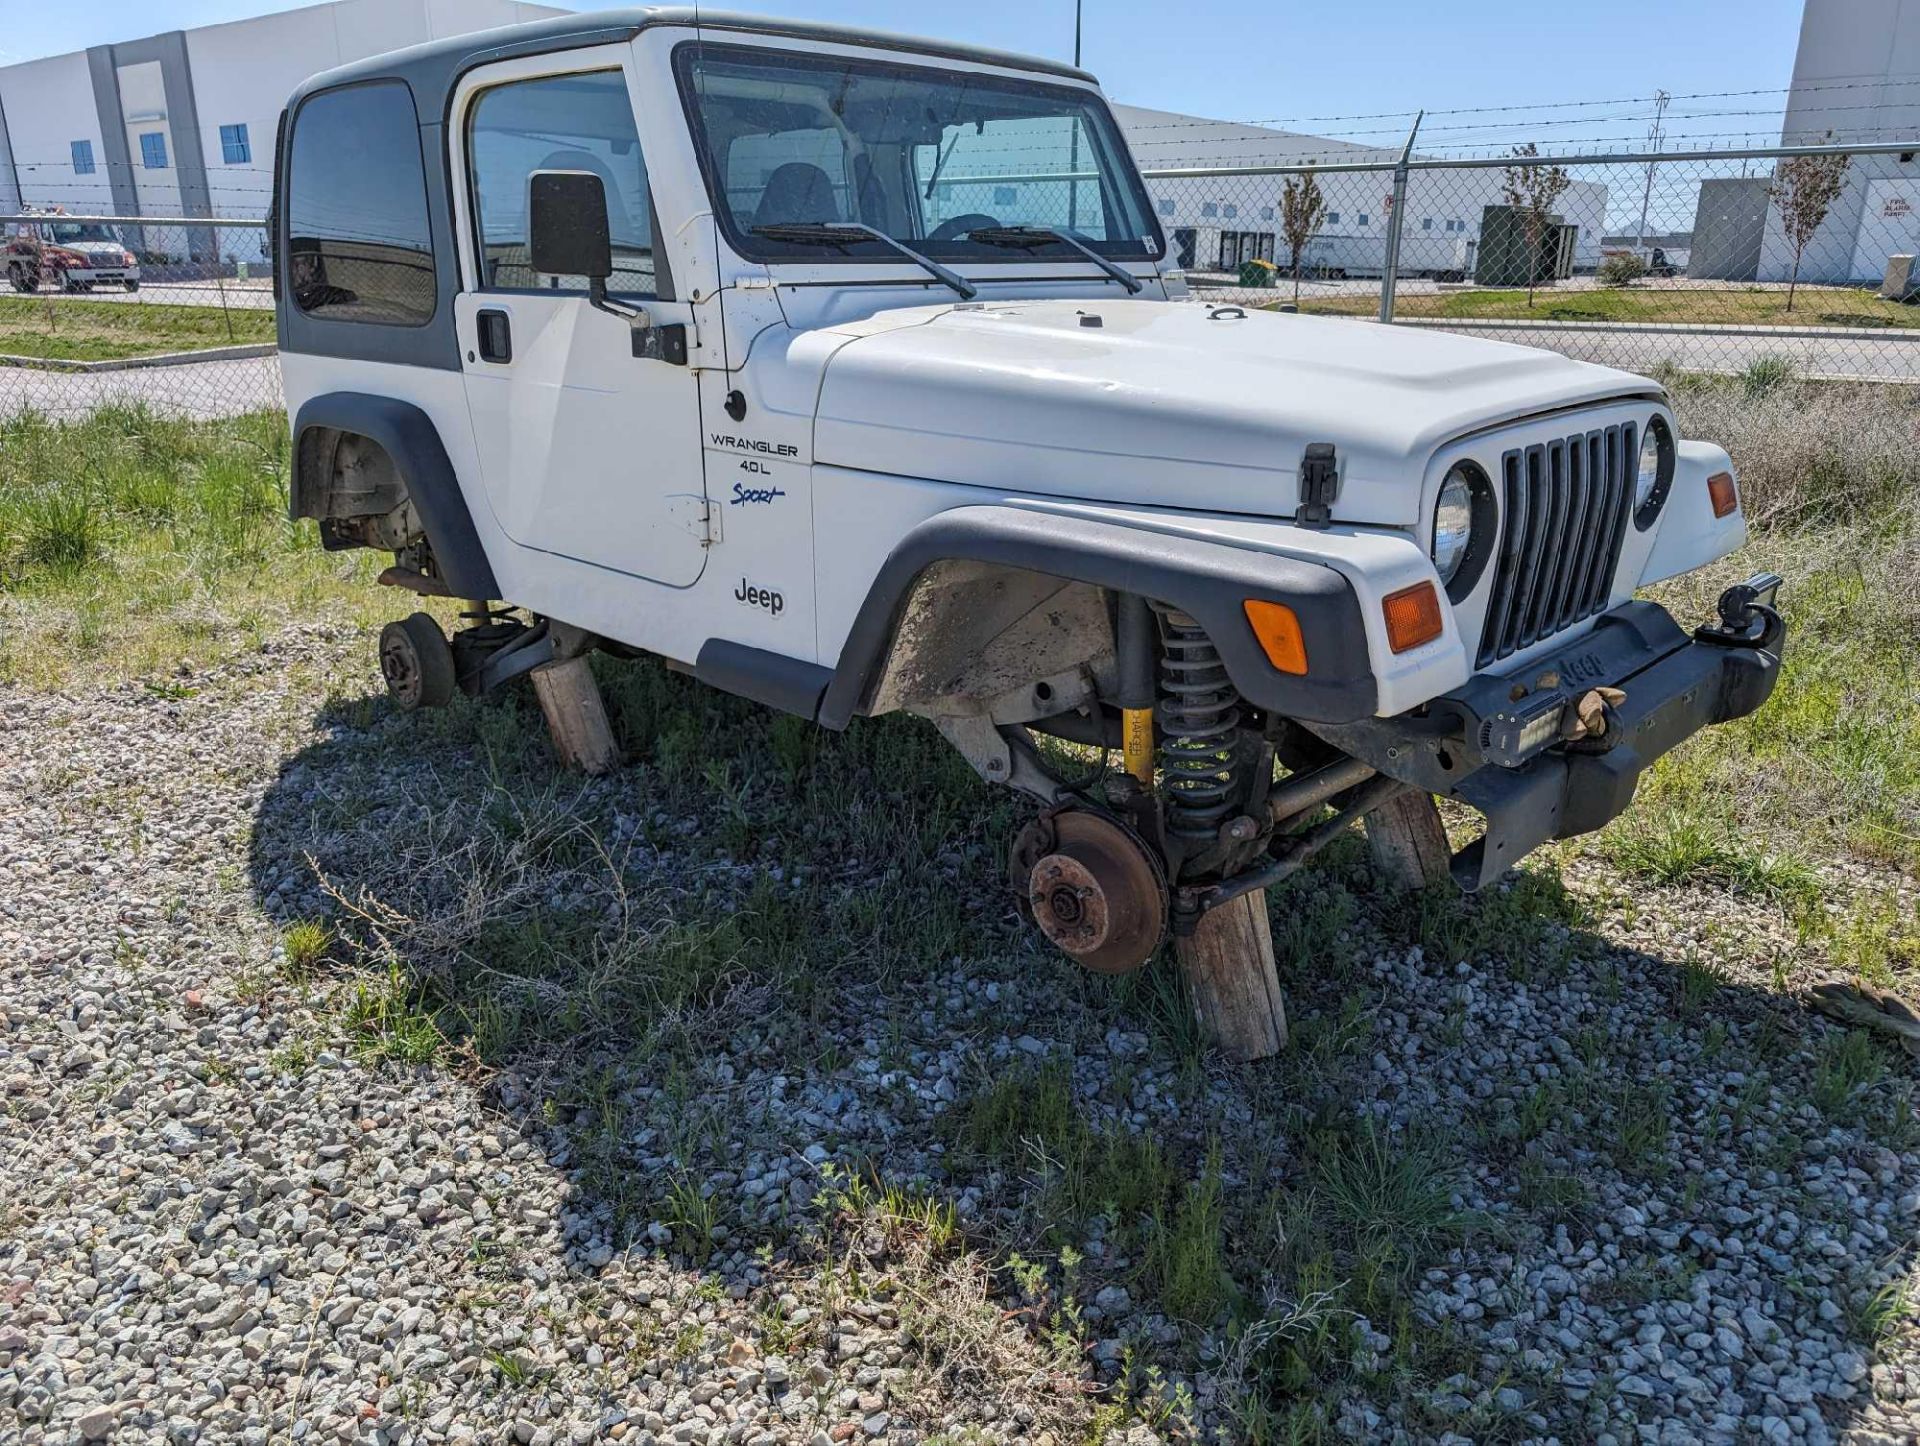 1998 Jeep Wrangler Sport 4wd, v6 VIN #: 1J4FY19S6WP712195 Features and Notes: currently not running. - Image 2 of 13